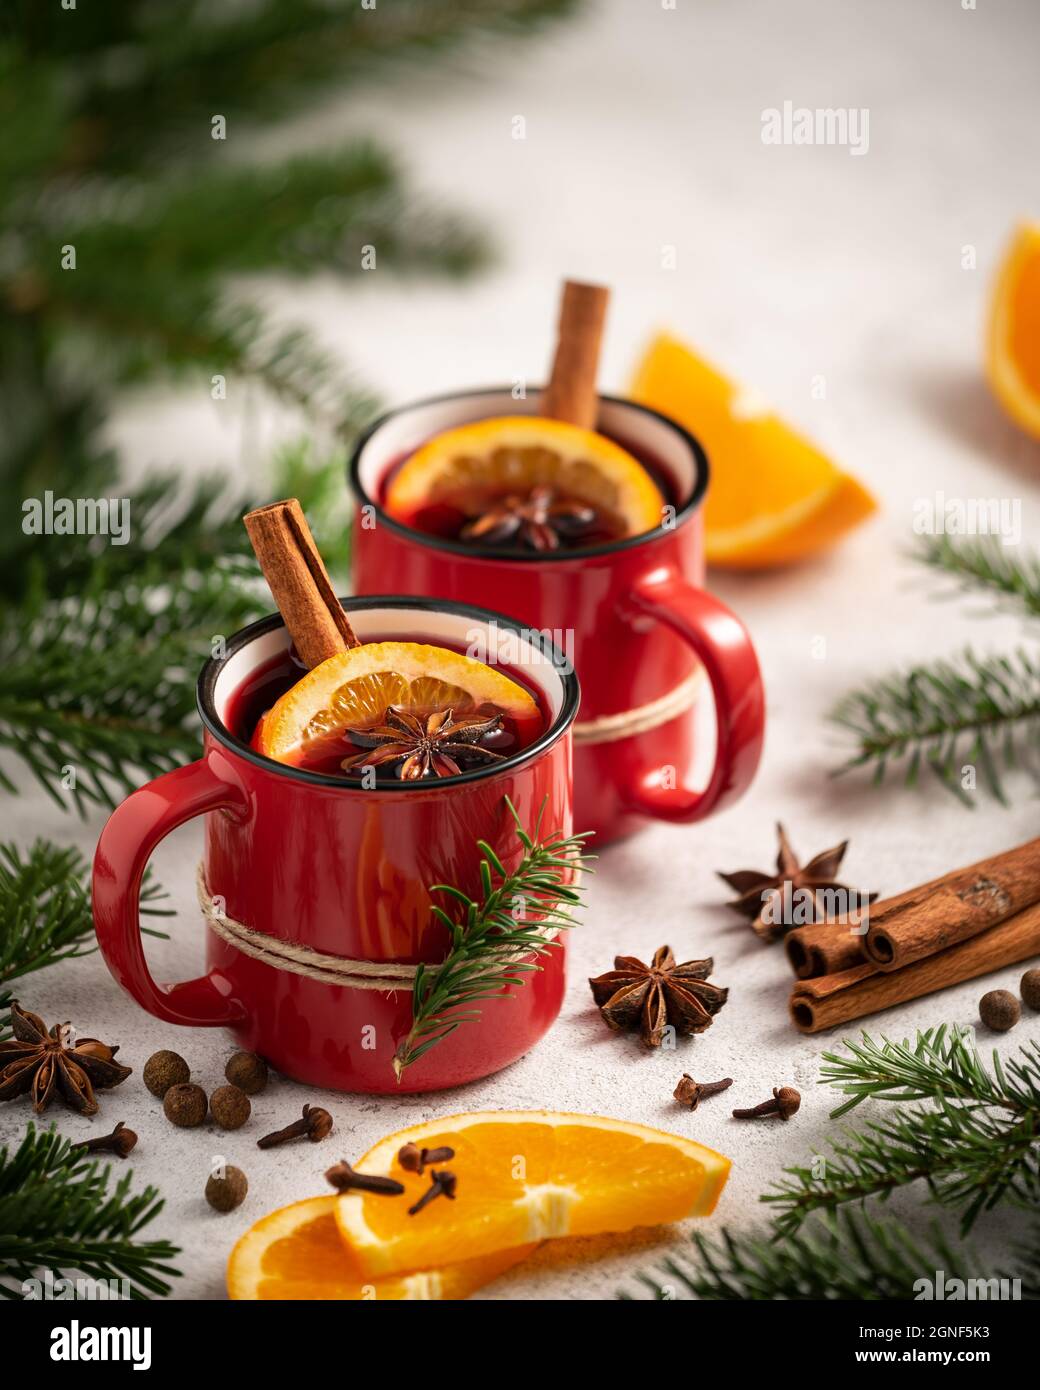 Christmas card with mulled wine, spices and oranges surrounded by fir branches Stock Photo